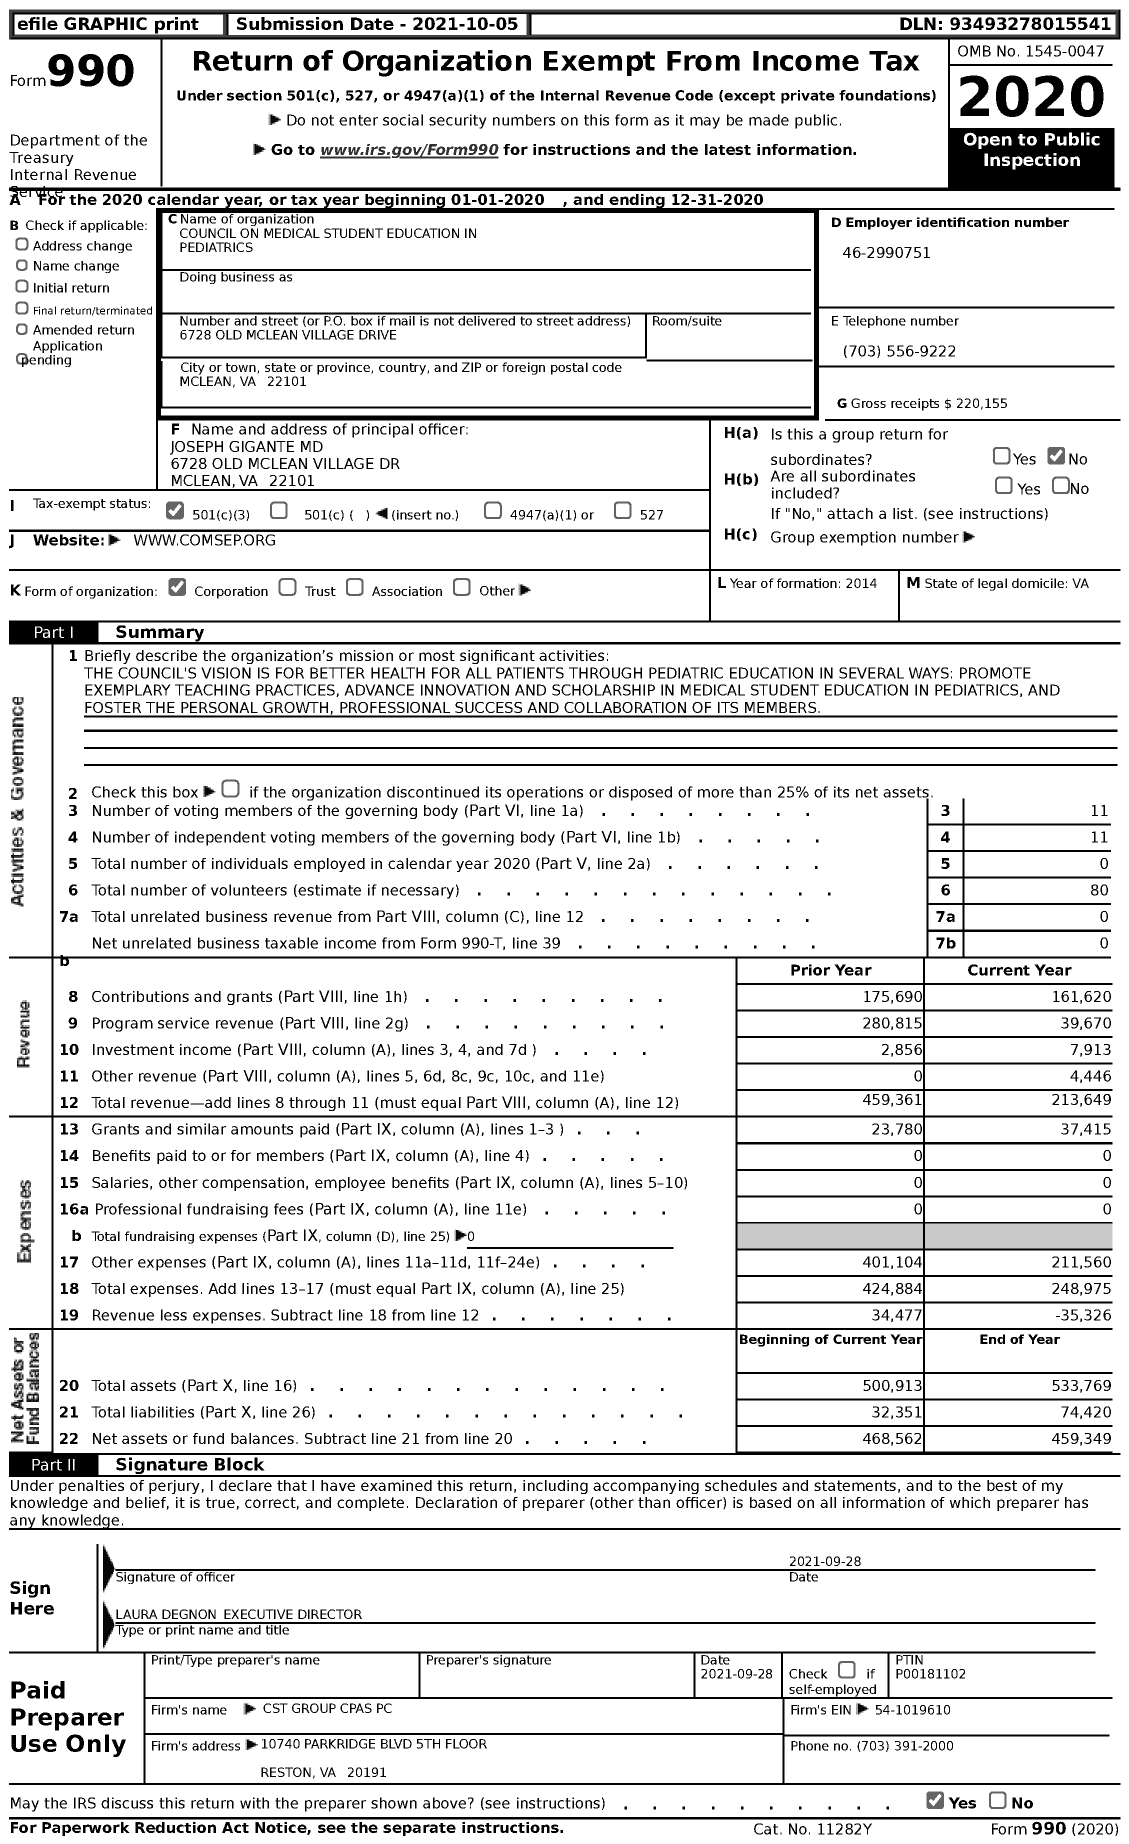 Image of first page of 2020 Form 990 for Council on Medical Student Education in Pediatrics